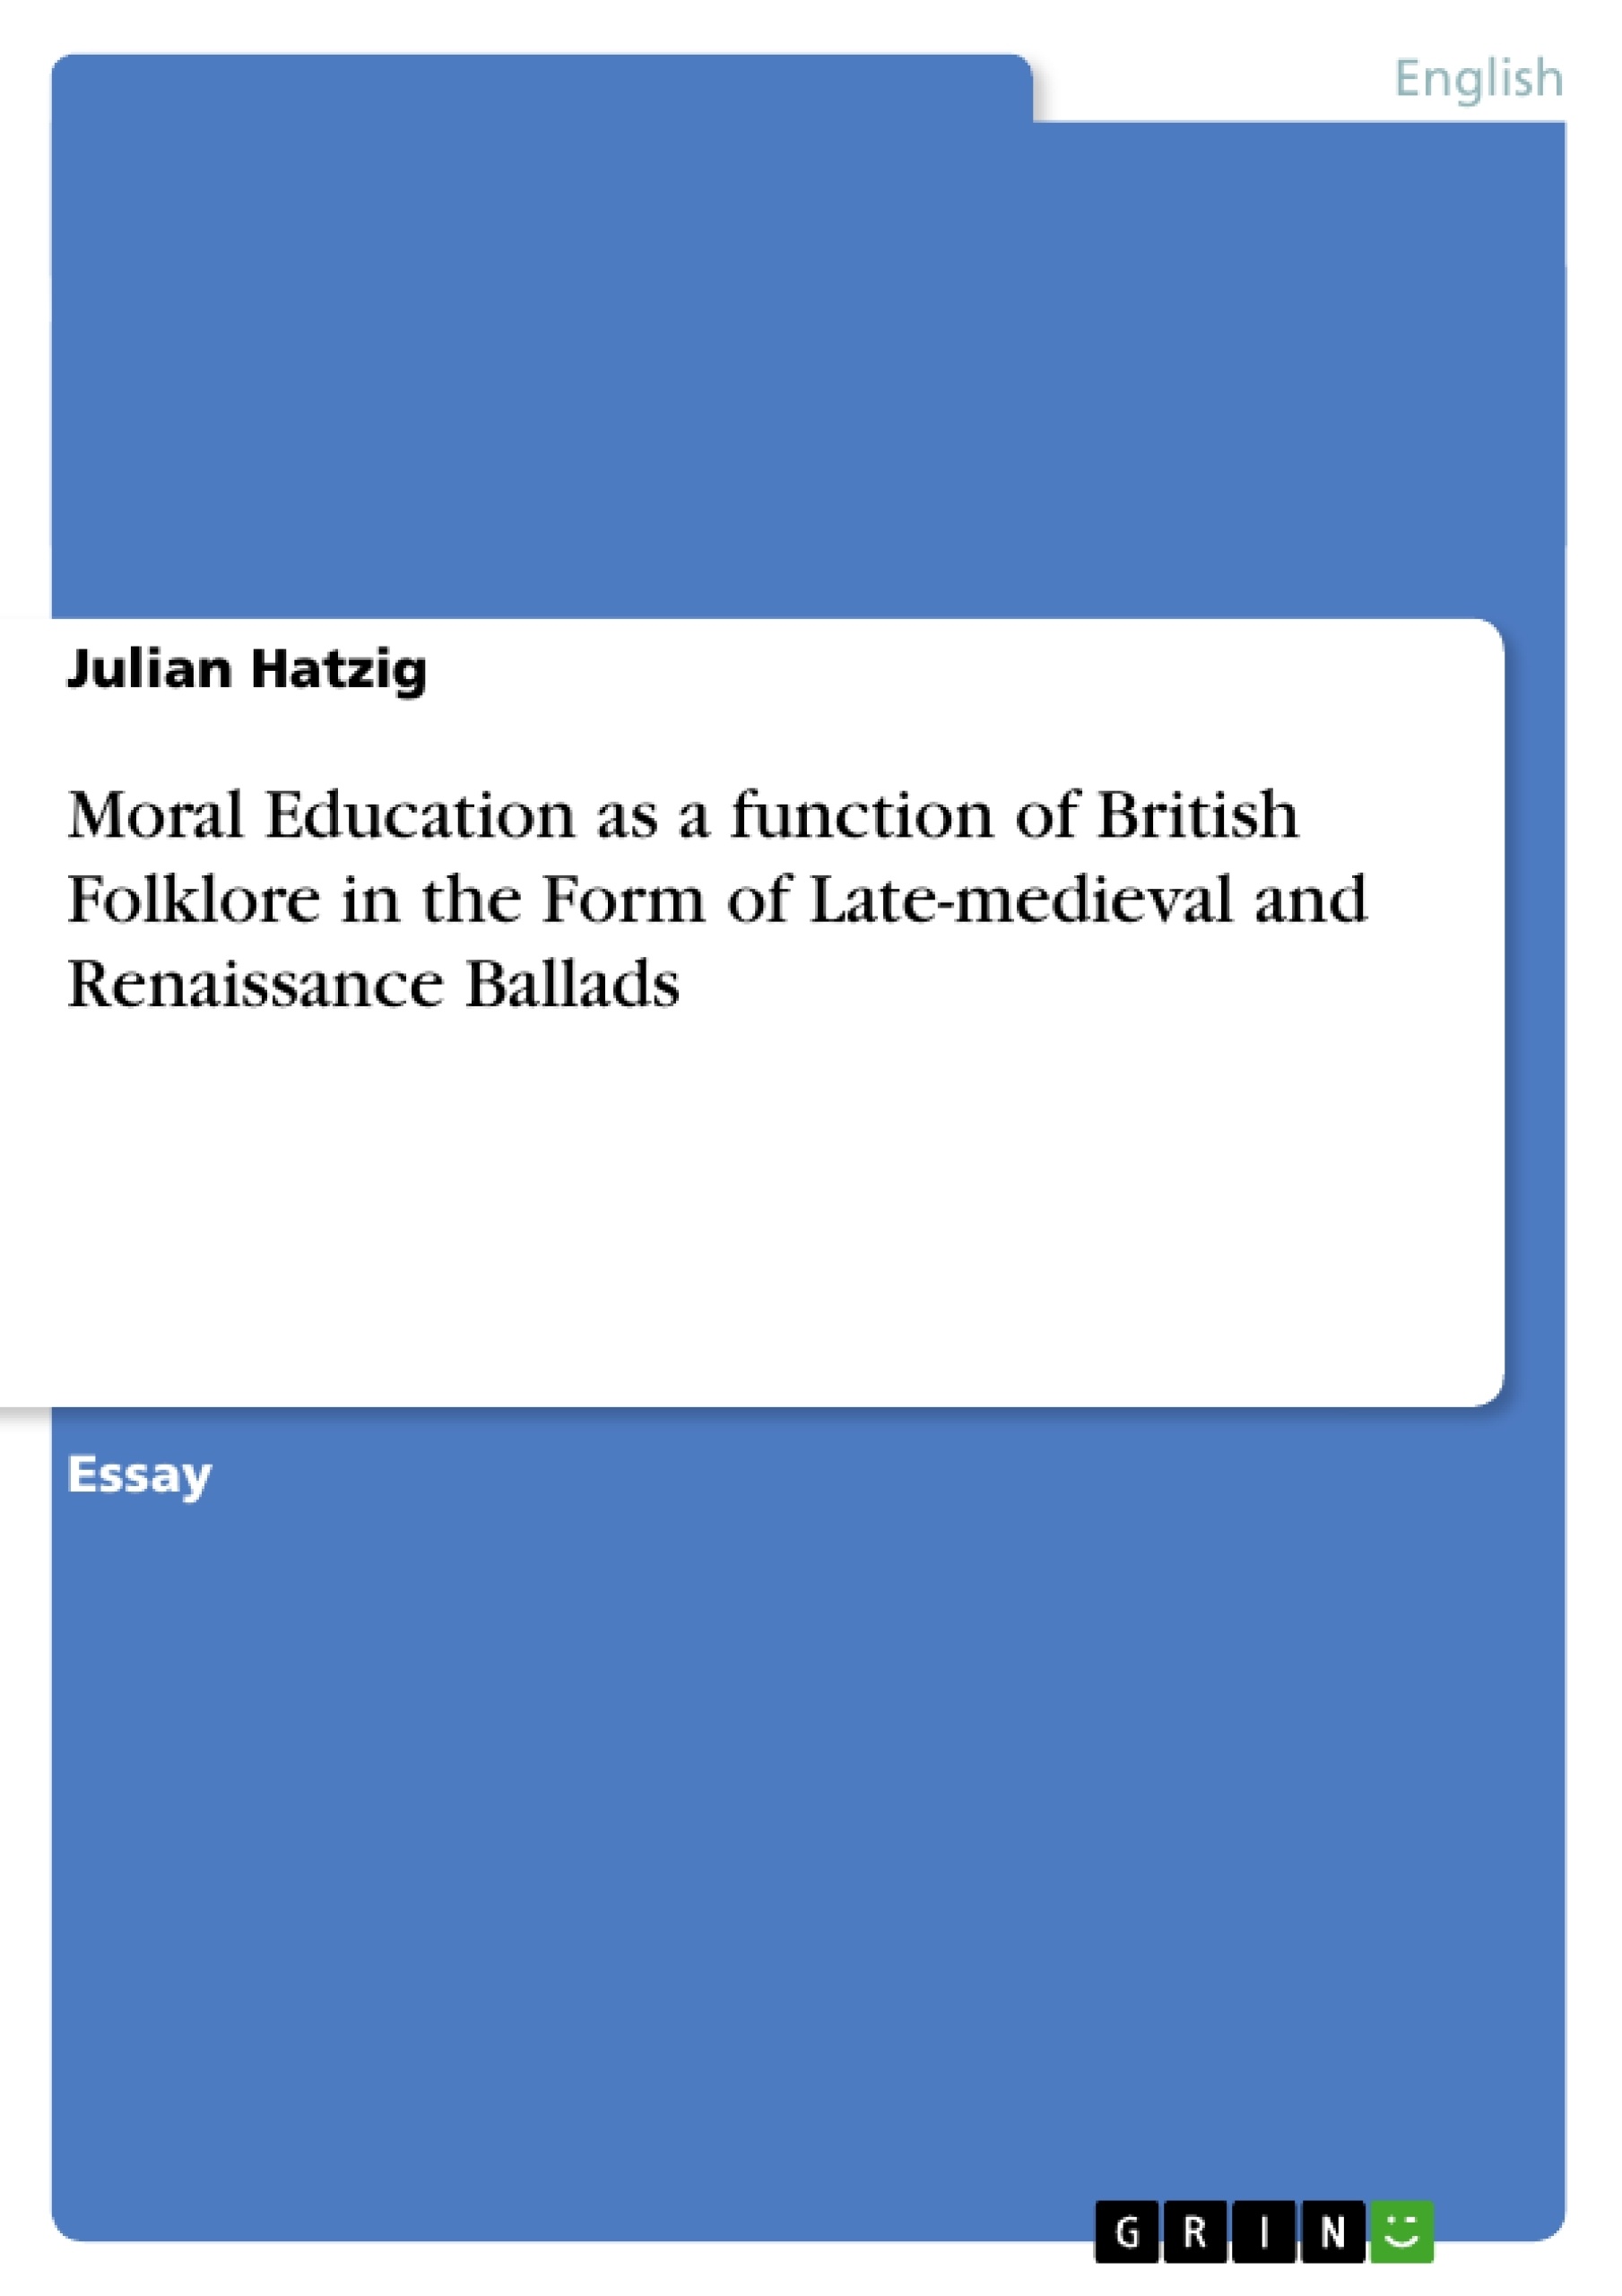 Titre: Moral Education as a function of British Folklore in the Form of Late-medieval and Renaissance Ballads